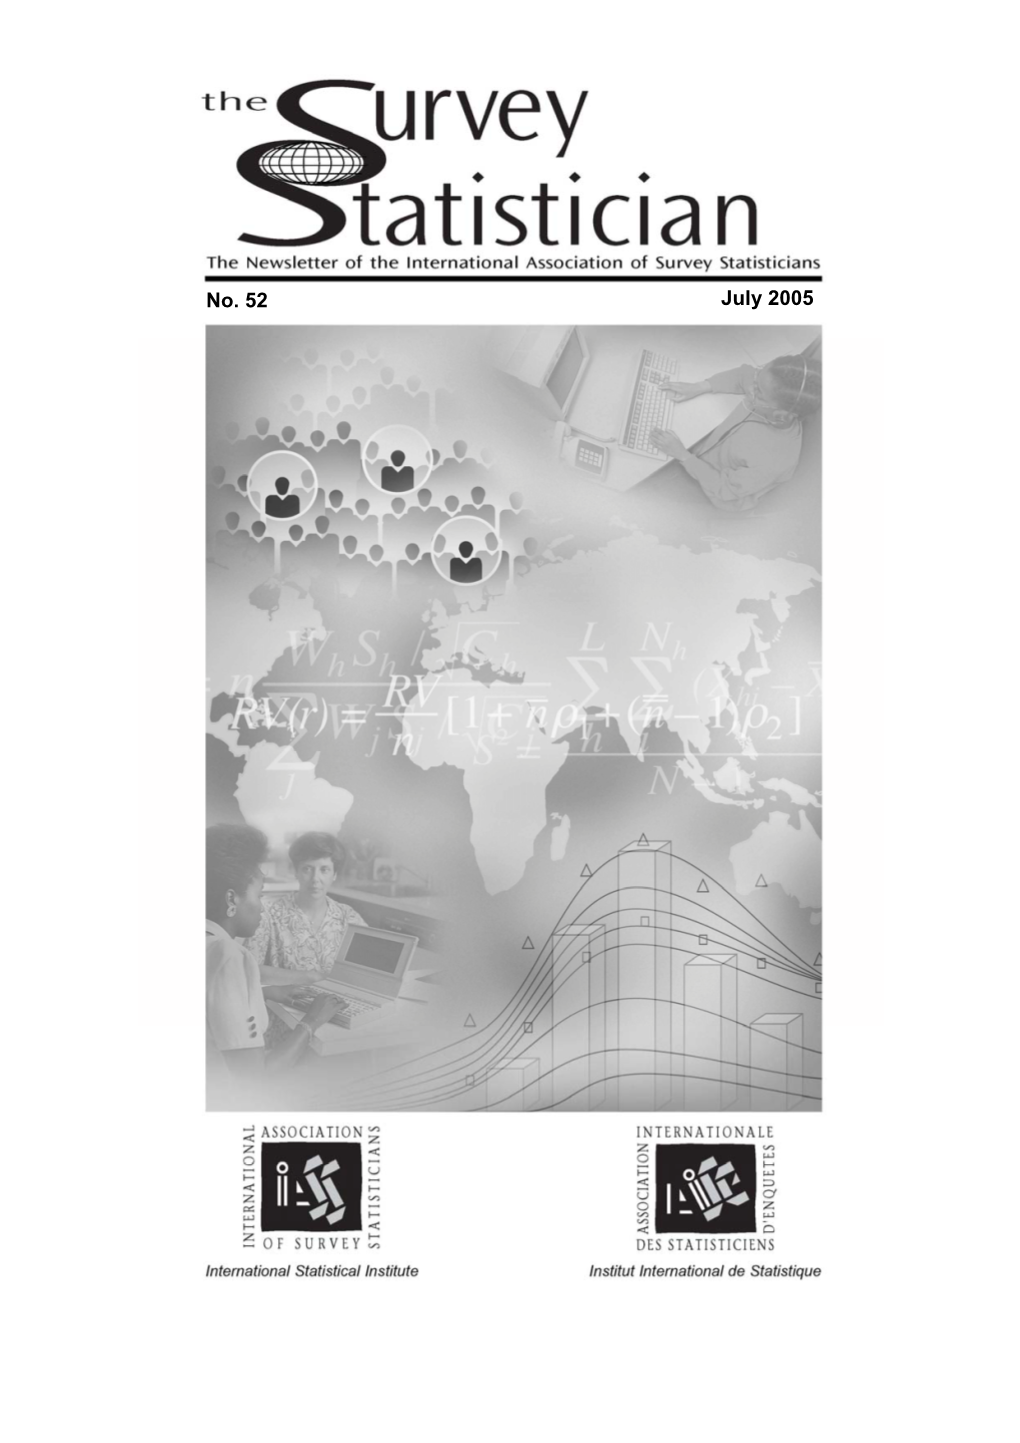 The Survey Statistician